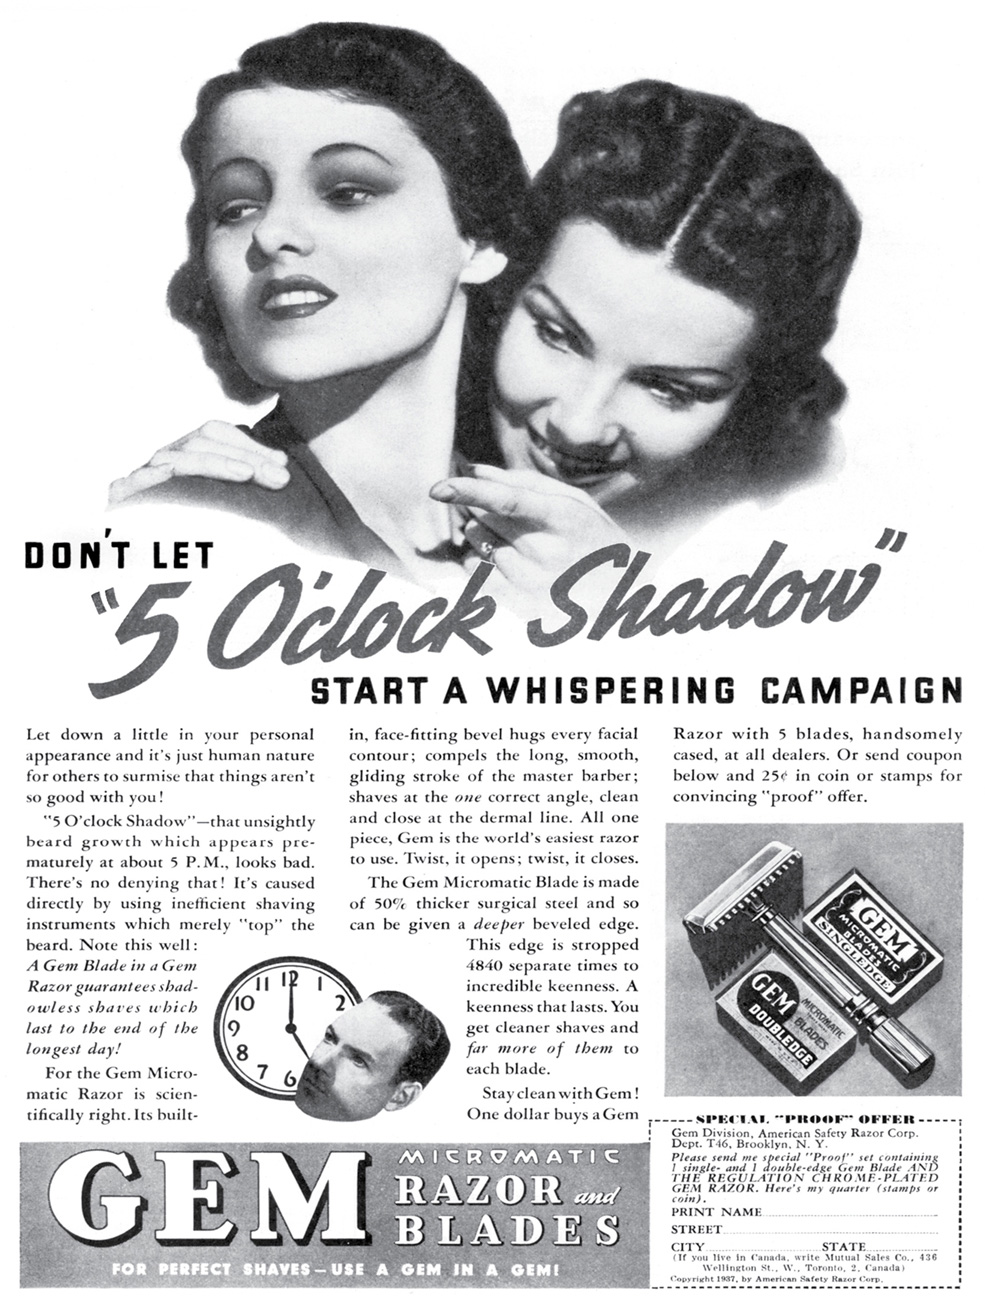 An advertisement for Gem Razor and Blades from “Time” magazine, 11 October nineteen thirty seven.